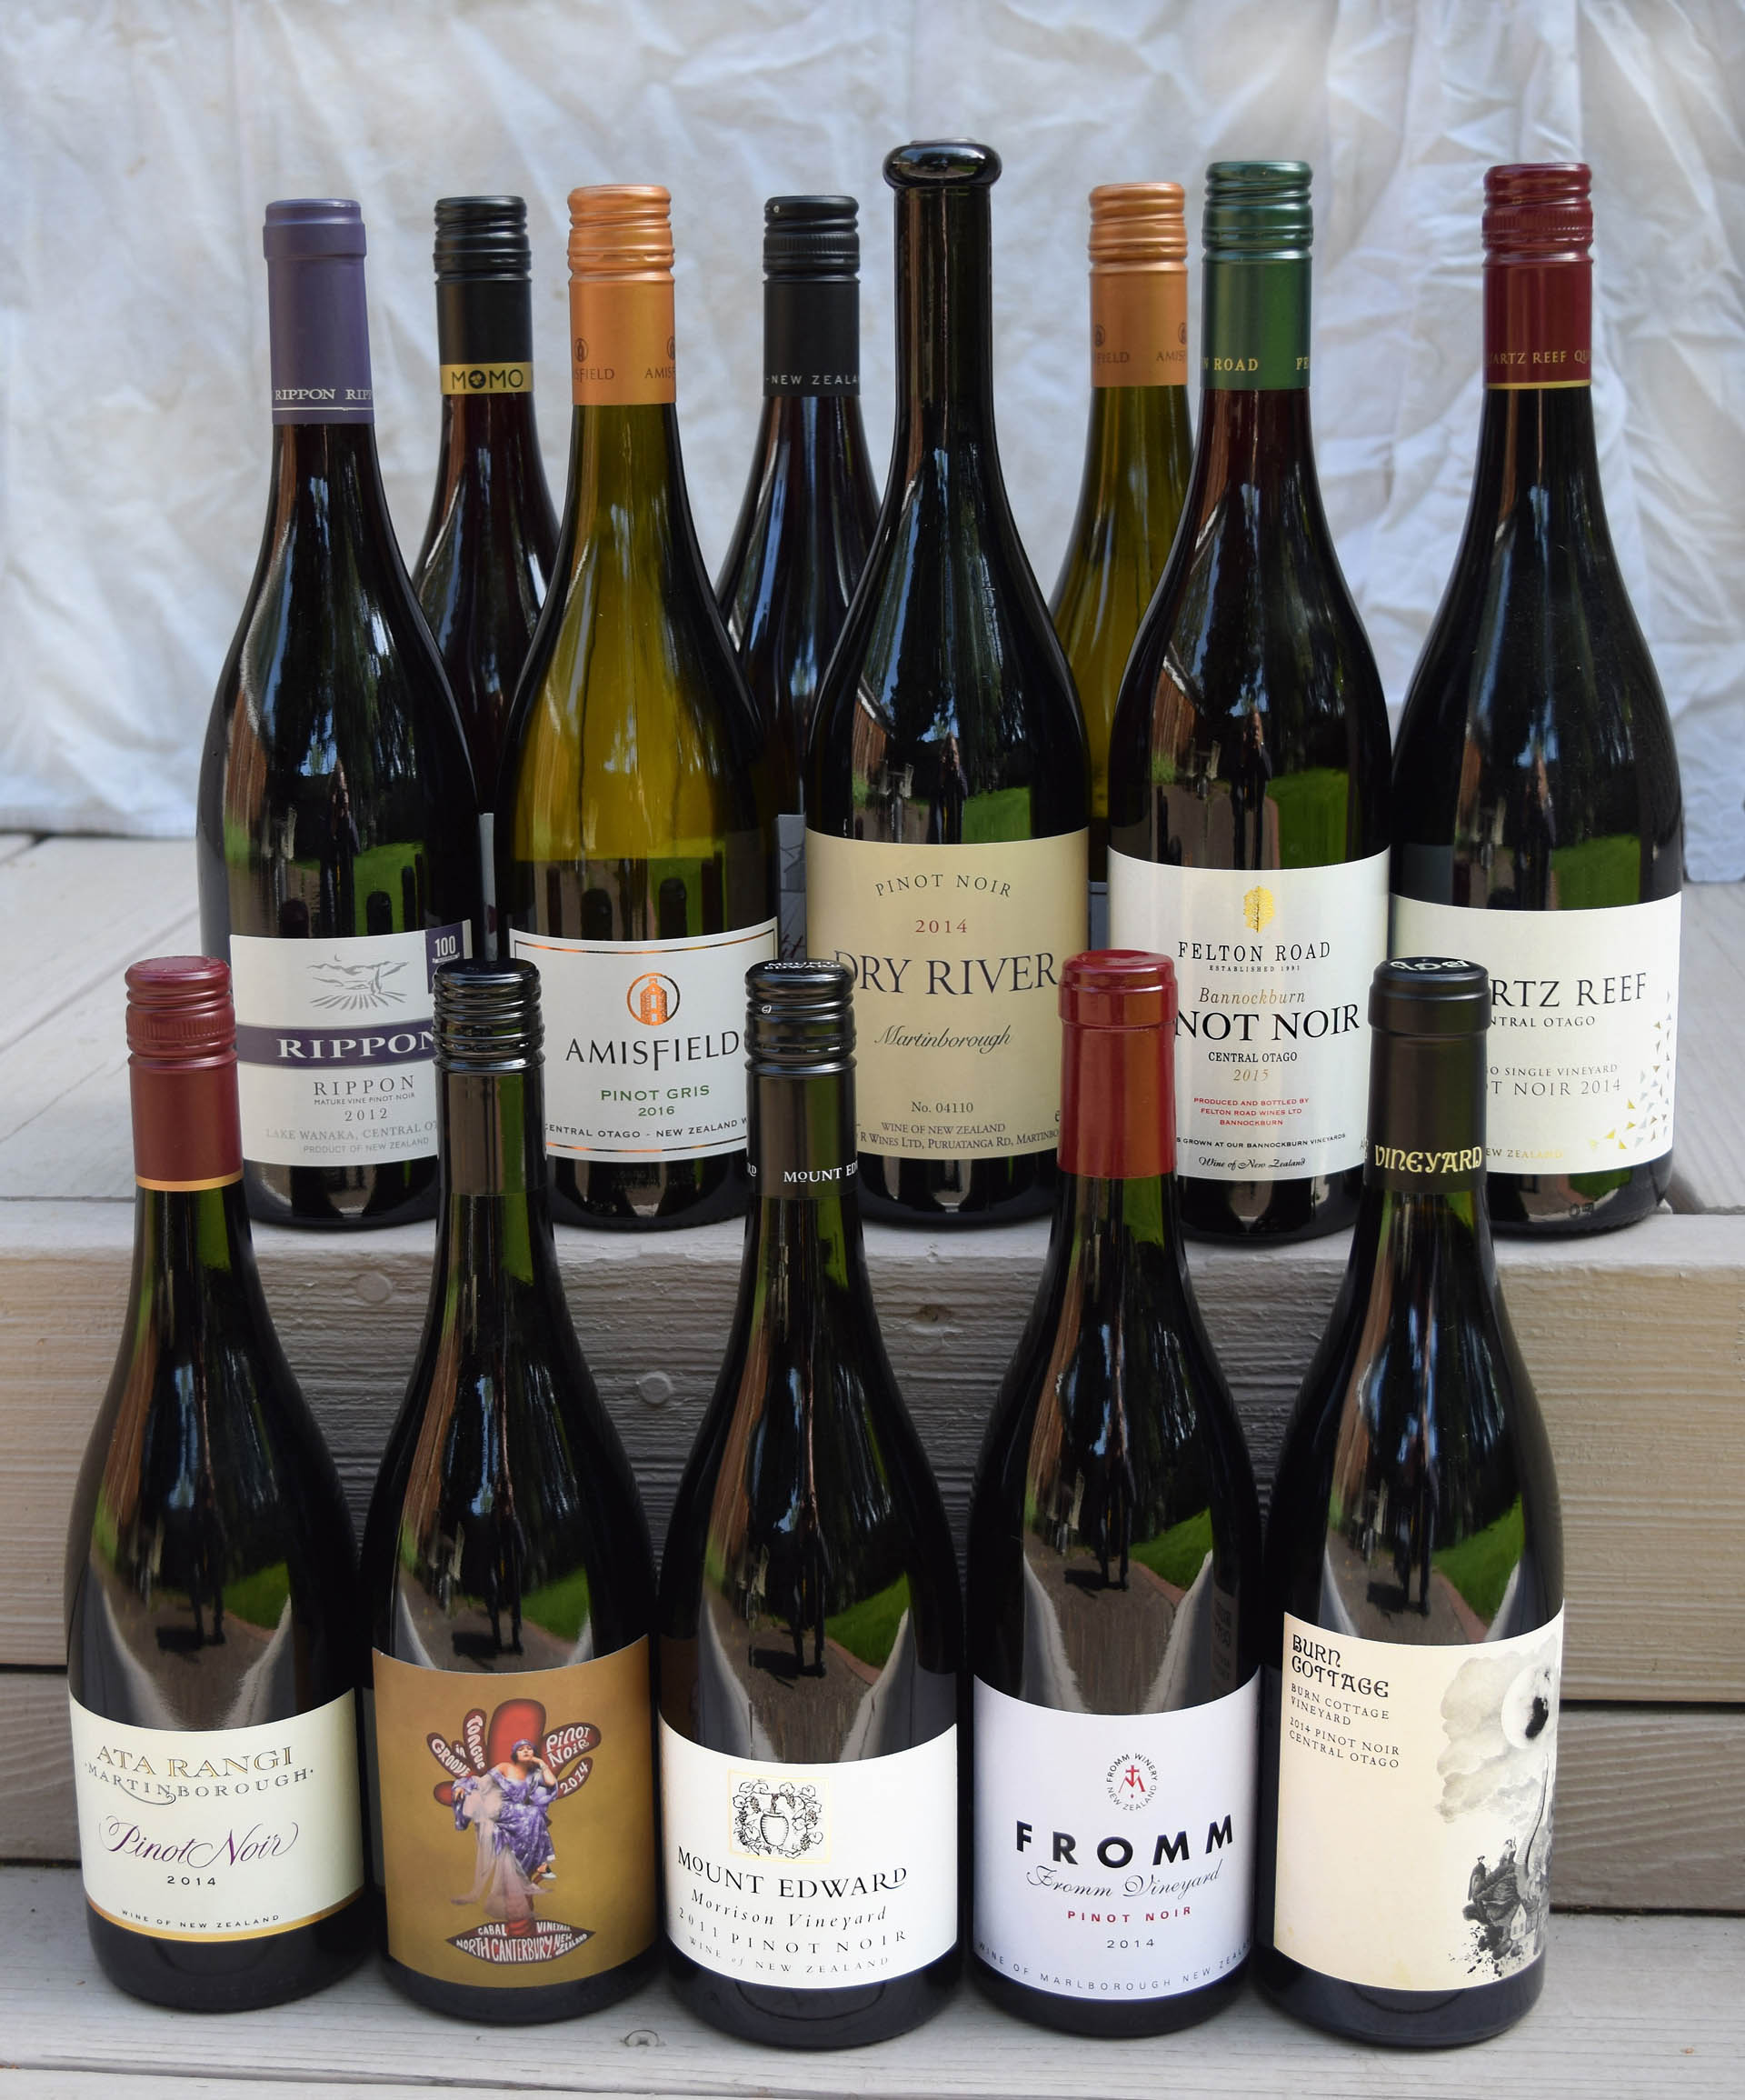 Although a small percentage of New Zealand wines makes it to the Bay Area, merchants here carry many of the country's top wines.